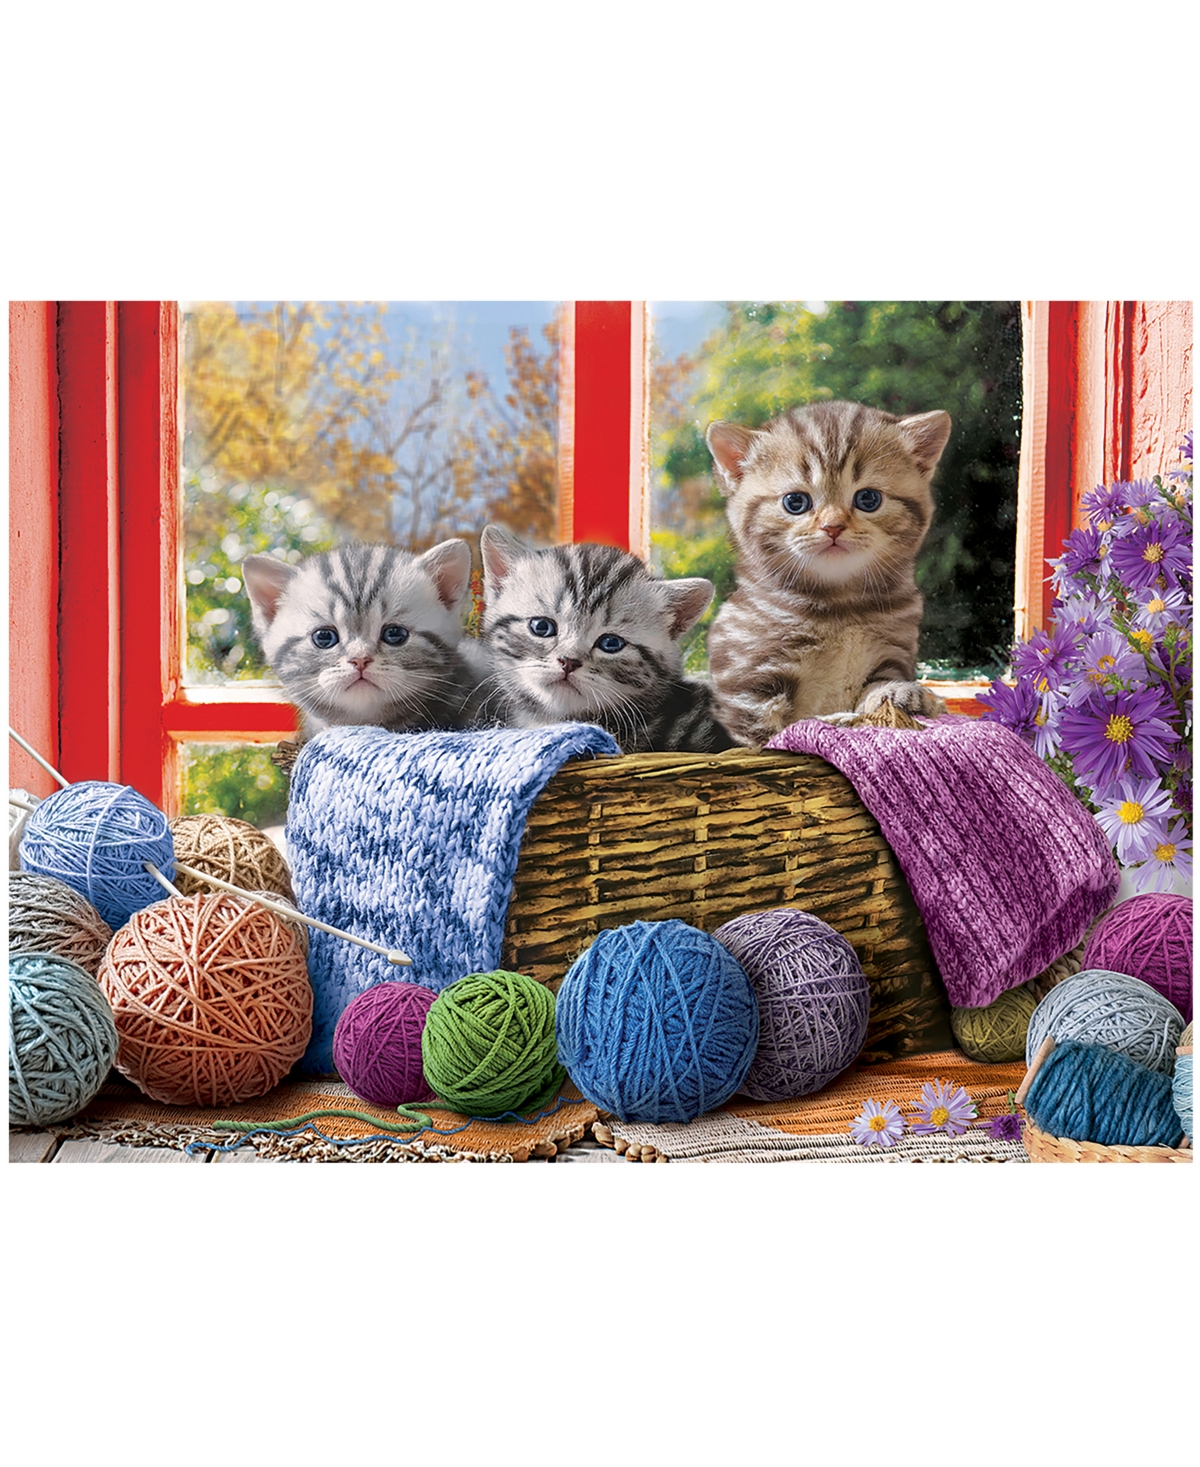 University Games Kids' Eurographics Incorporated Knittin' Kittens Large Pieces Puzzle, 500 Pieces In No Color